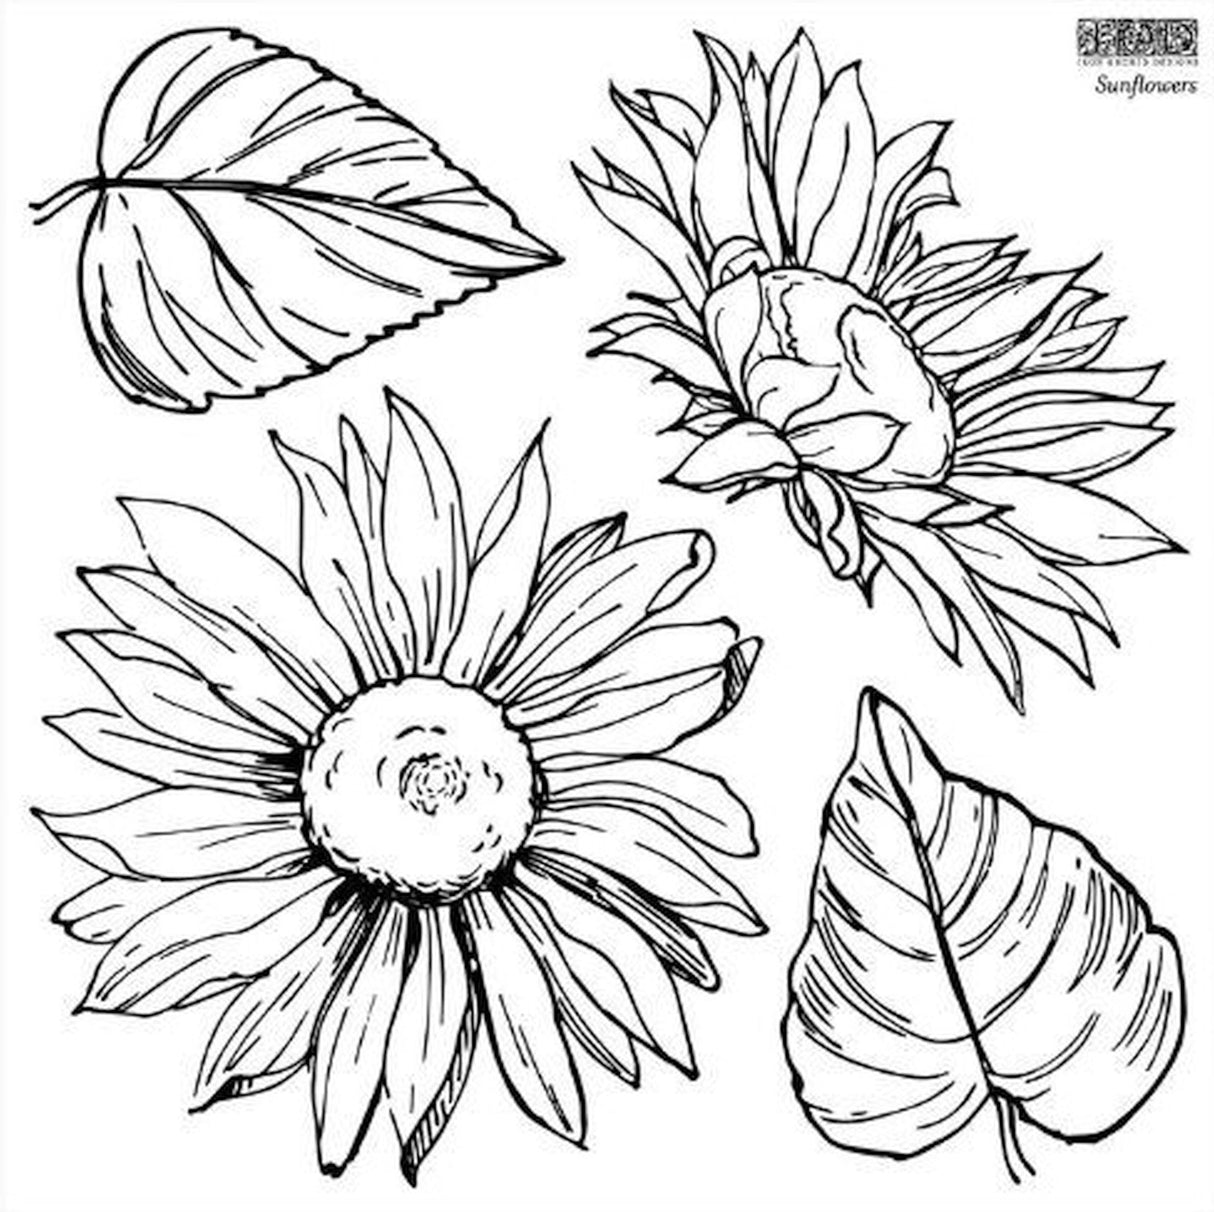 Sunflowers Decor Stamp by IOD - Iron Orchid Designs @ Painted Heirloom